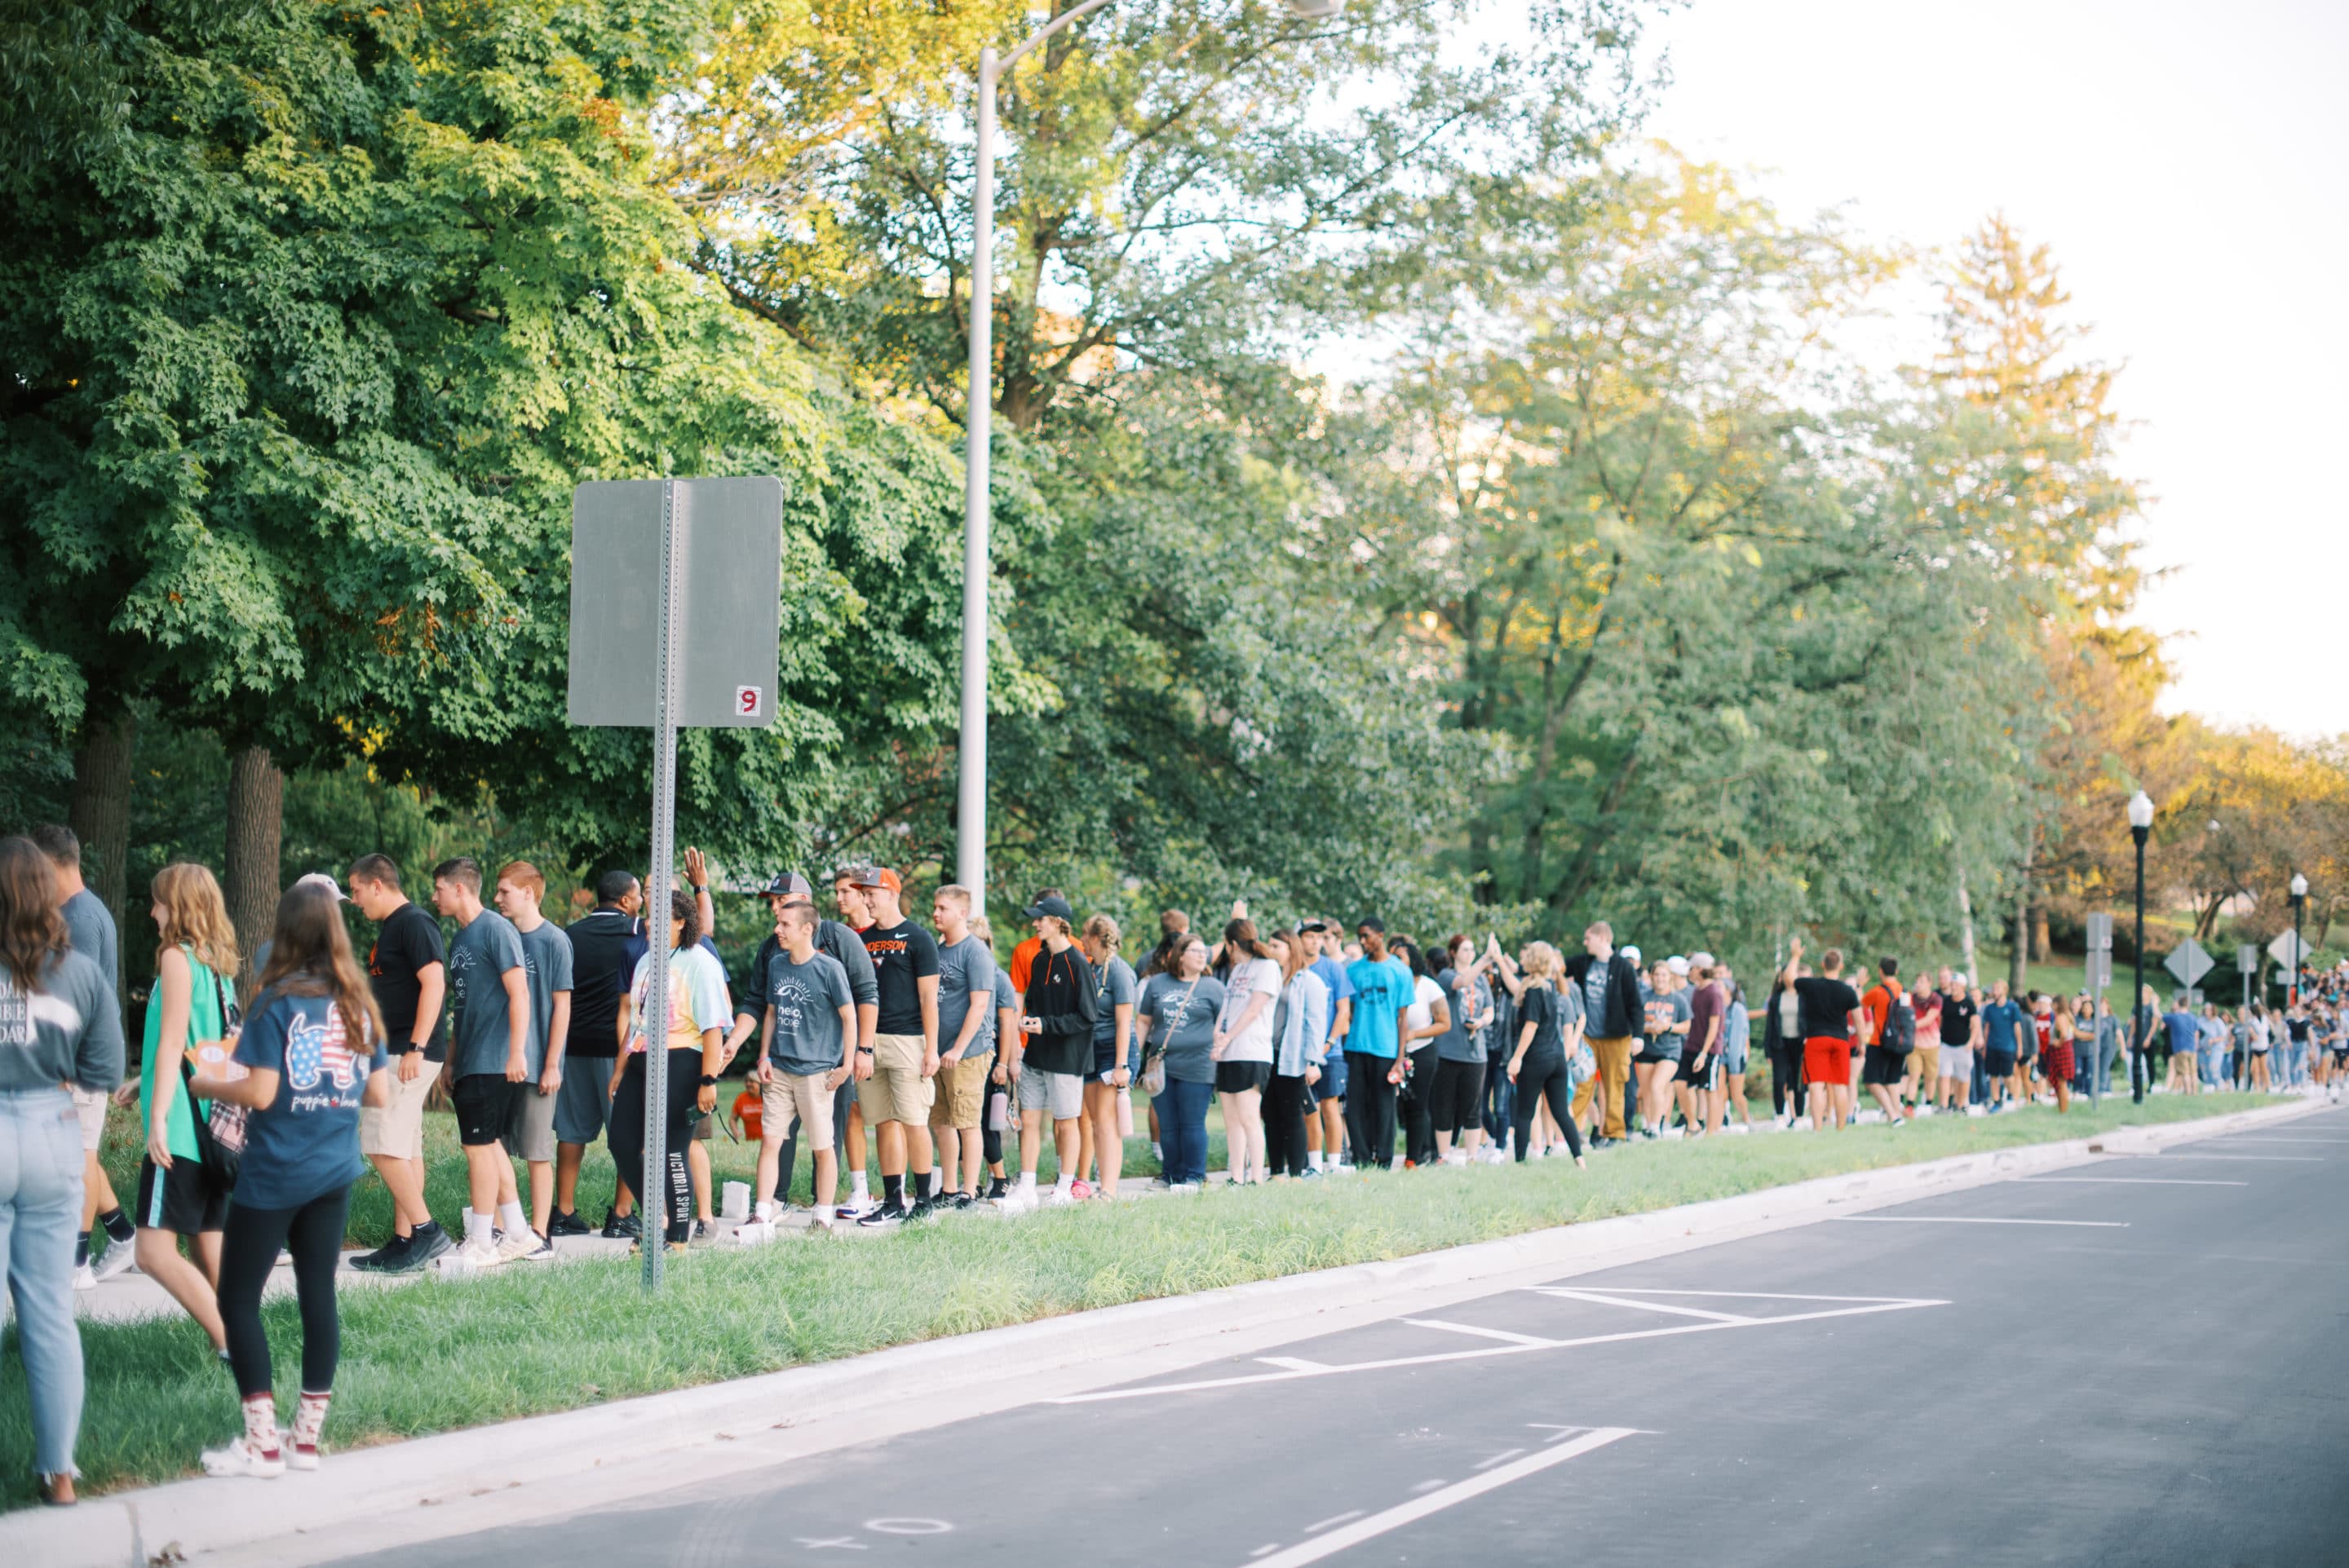 Students walking to the rock